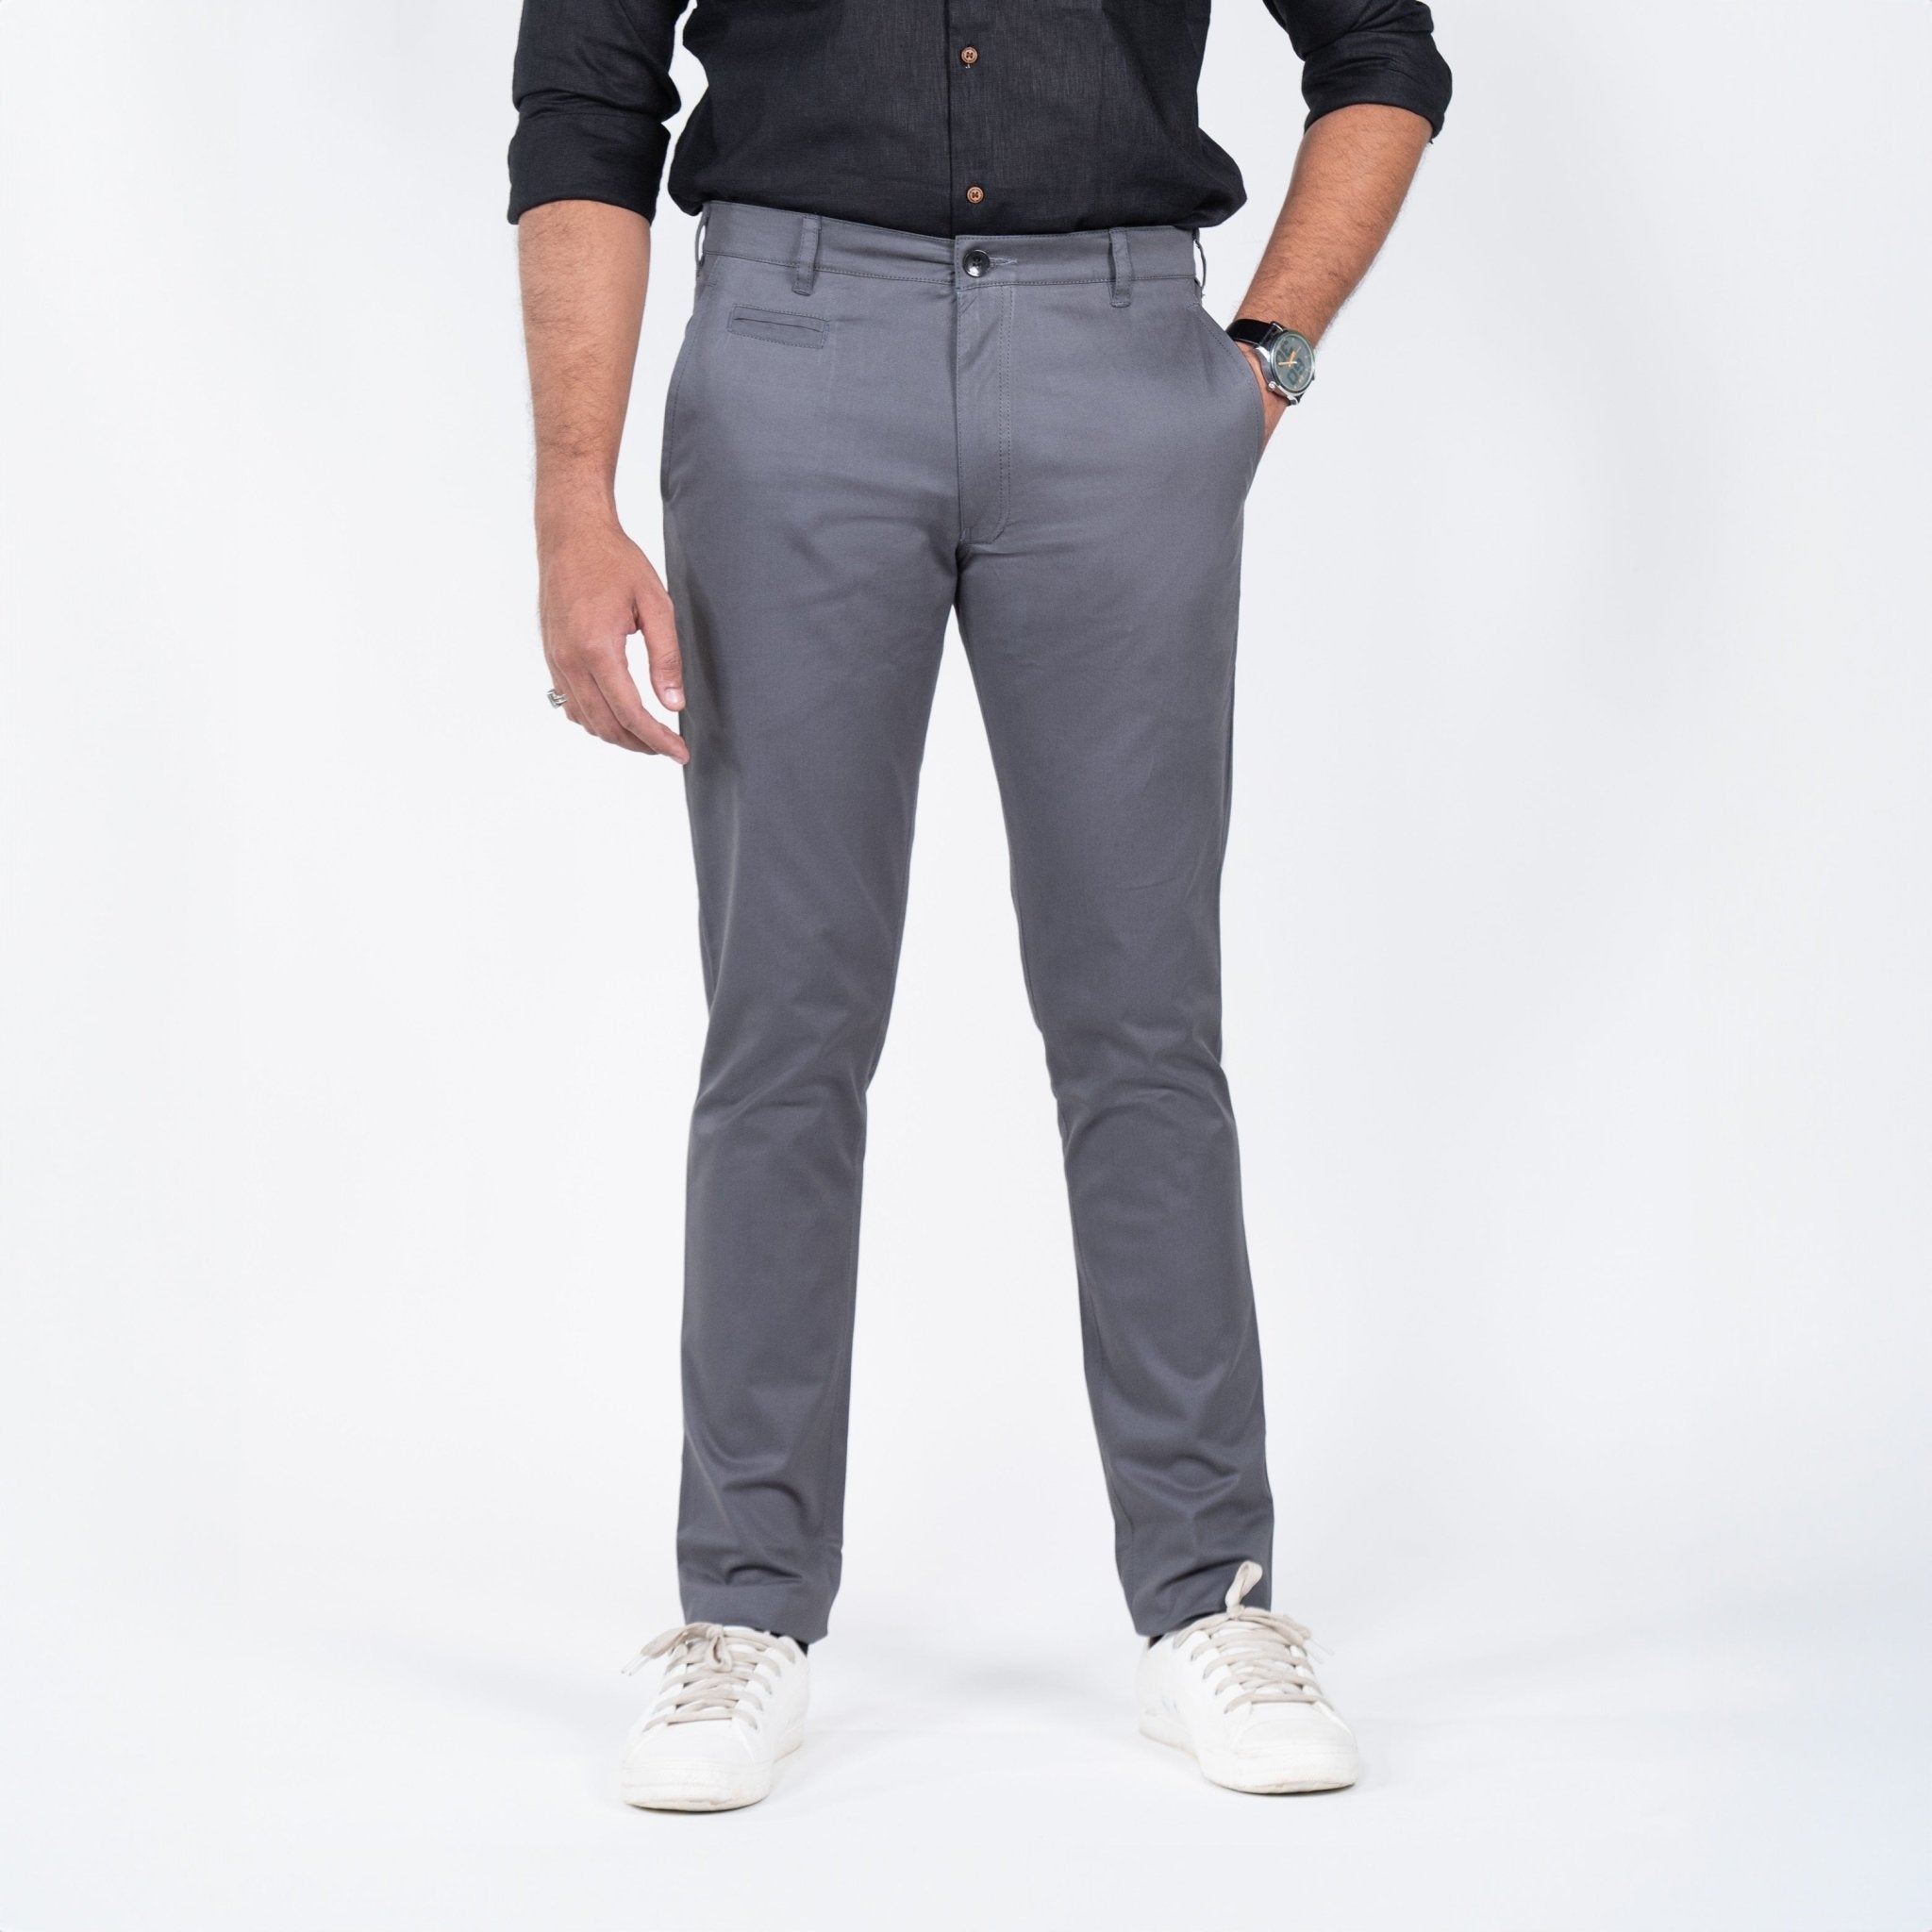 New men's fashion casual pants 100% cotton, high quality men's business  casual pants | Wish